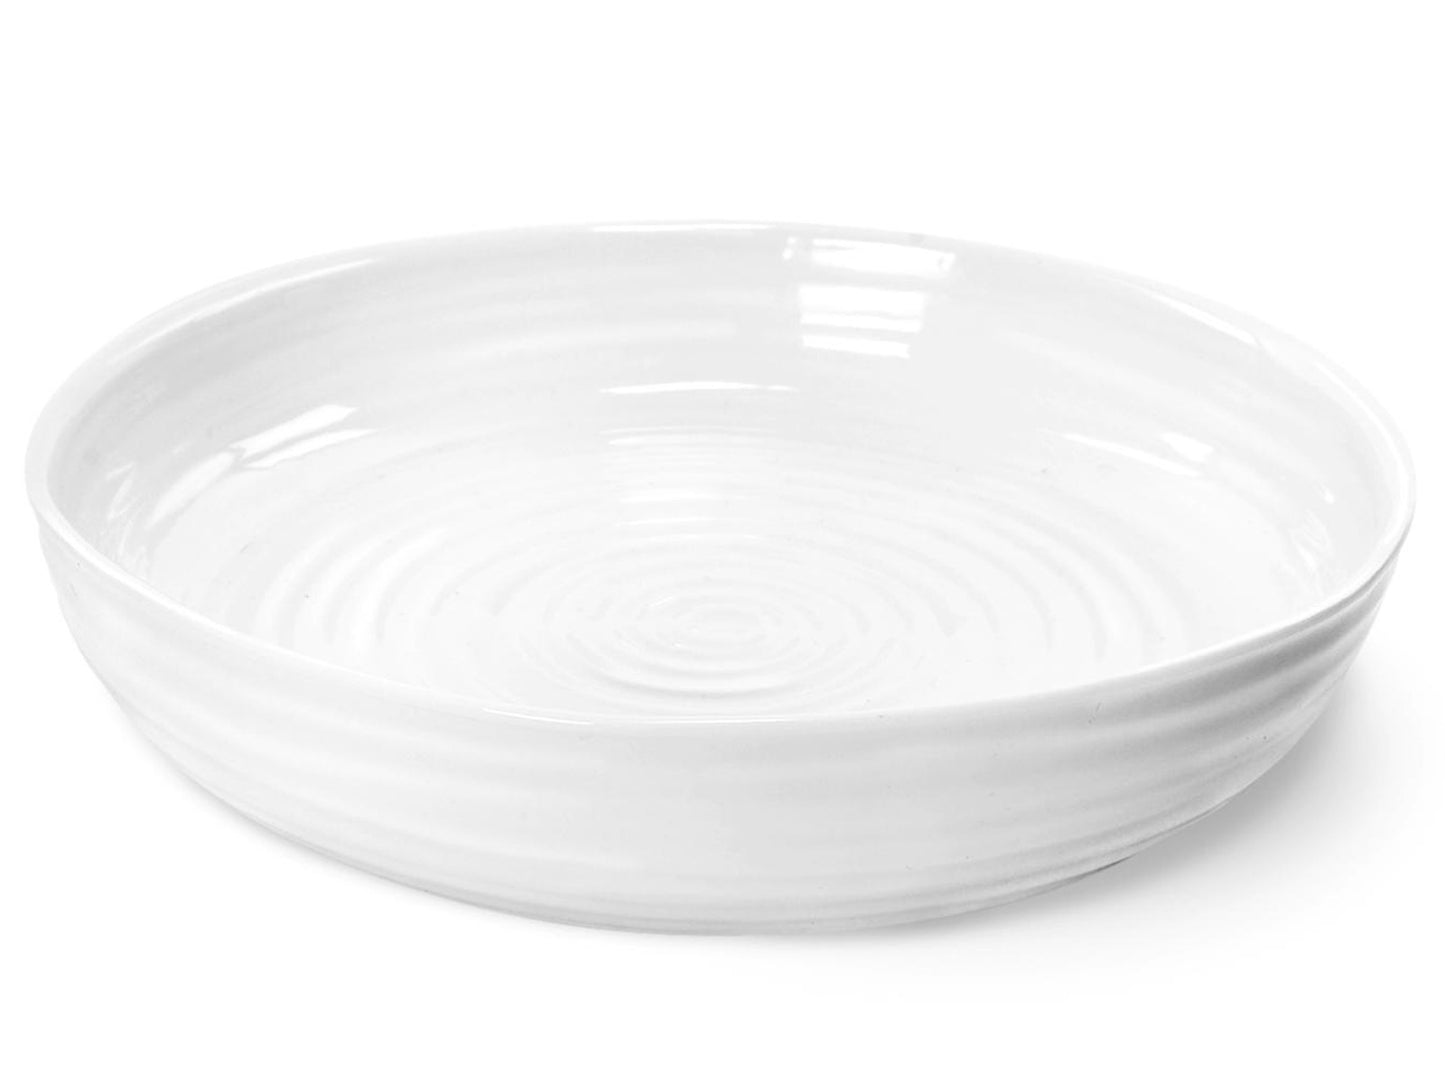 This Sophie Conran Round Roasting Dish is made of a white porcelain that has been finished with a clear glaze. Designed with Sophie's staple ripple effect, this dish is ideal for roasting large quantities of vegetables or potatoes, and is dishwasher, oven, freezer and microwave safe.